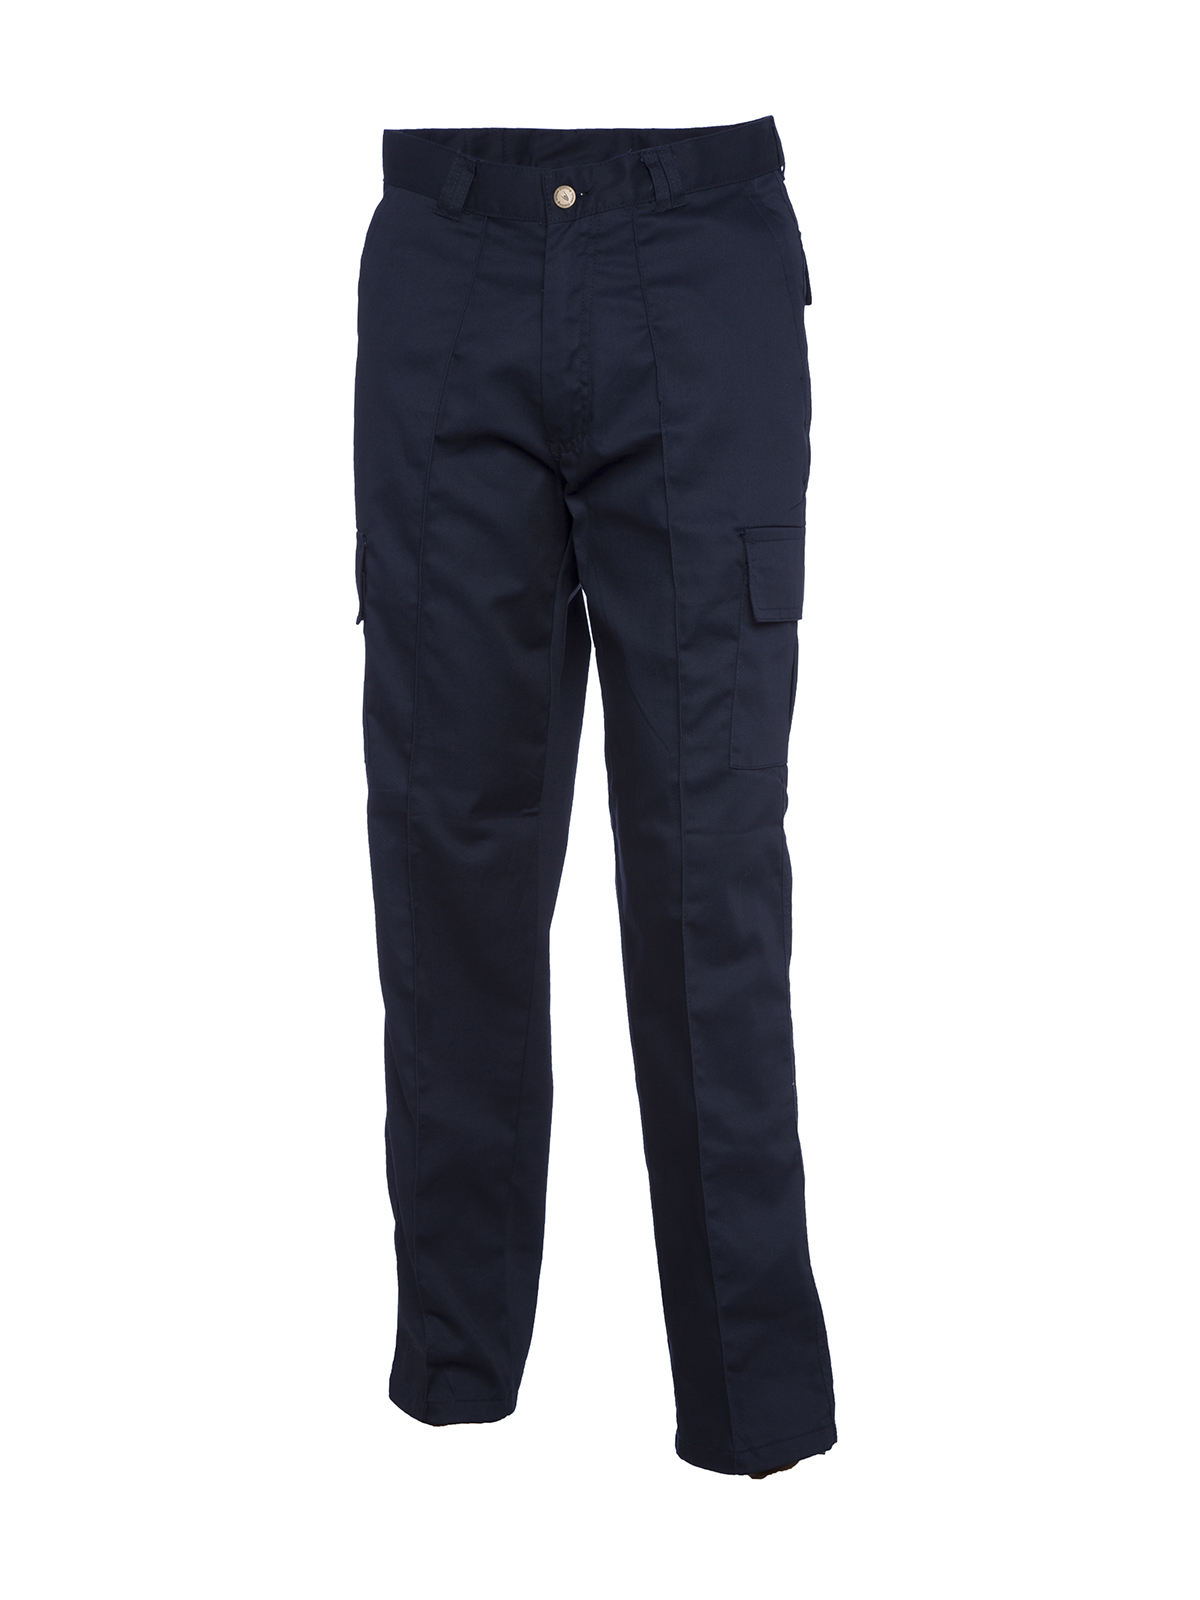 Cargo Trousers, Navy Blue - 30S